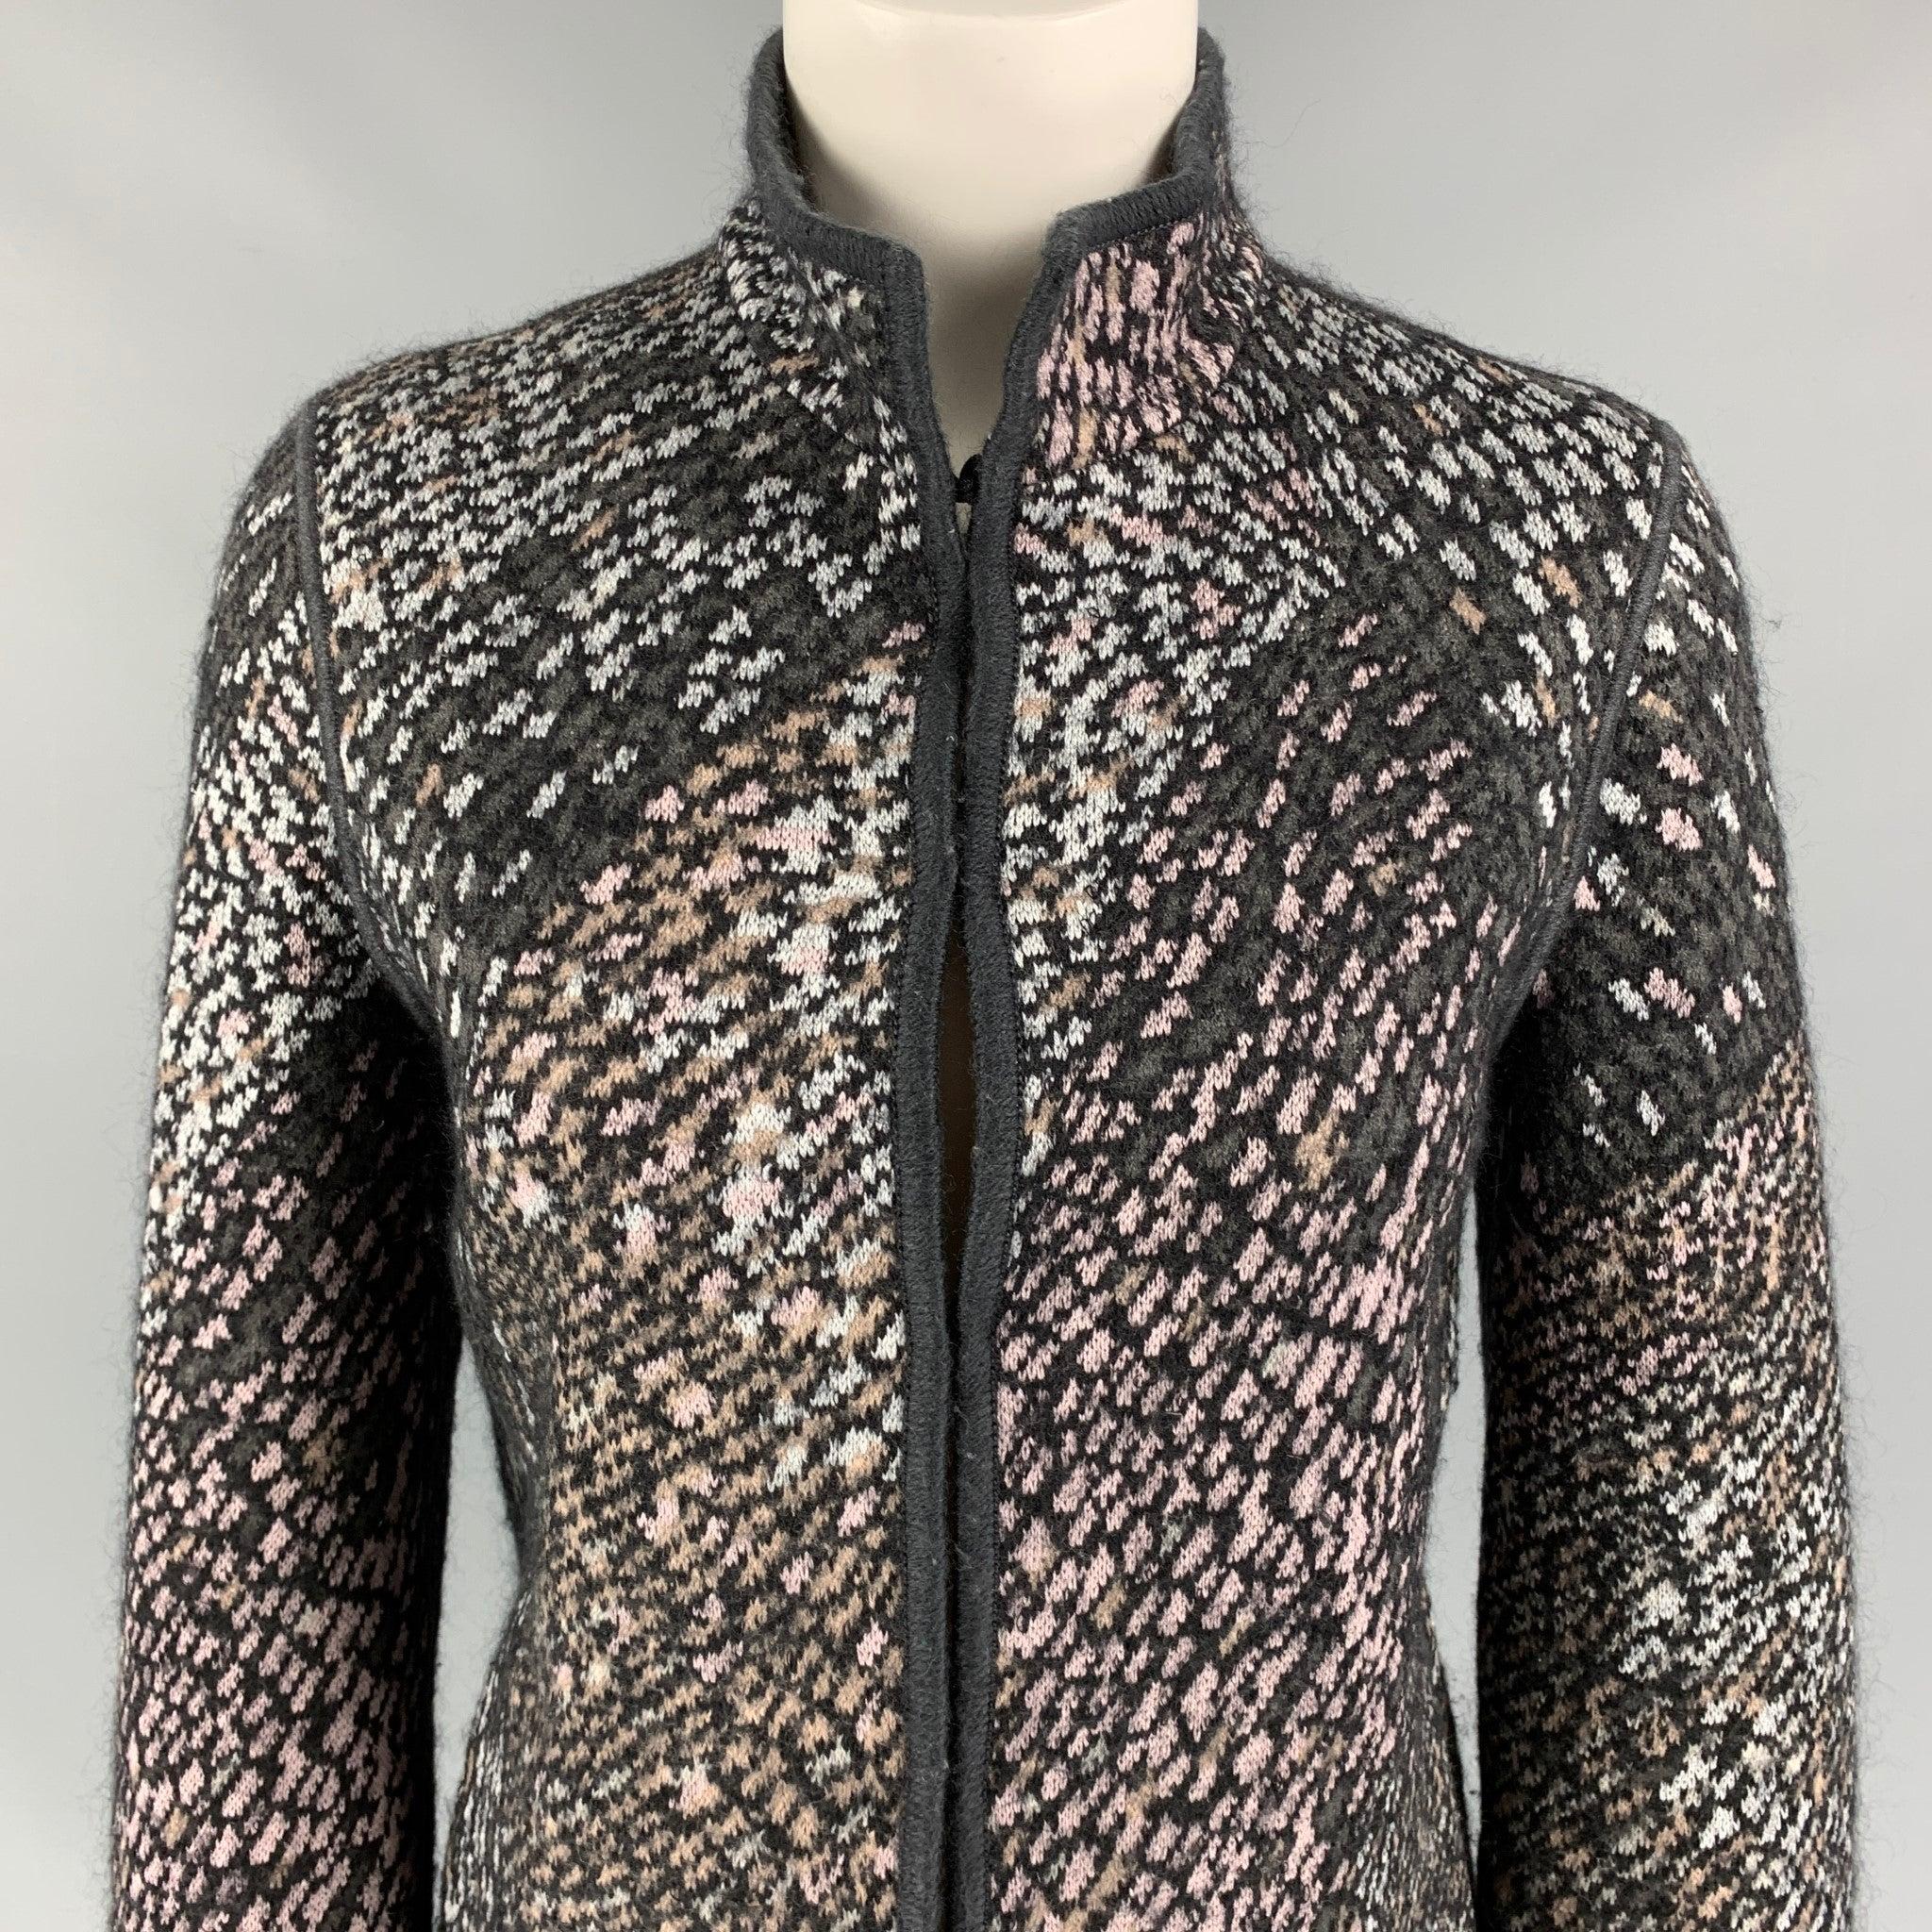 MISSONI jacket comes in a charcoal & silver knitted wool featuring a high collar, long sleeves, slit pockets, and a hook & loop closure. Made in Italy.
Very Good
Pre-Owned Condition. 

Marked:   40 

Measurements: 
 
Shoulder: 16 inches  Bust: 34